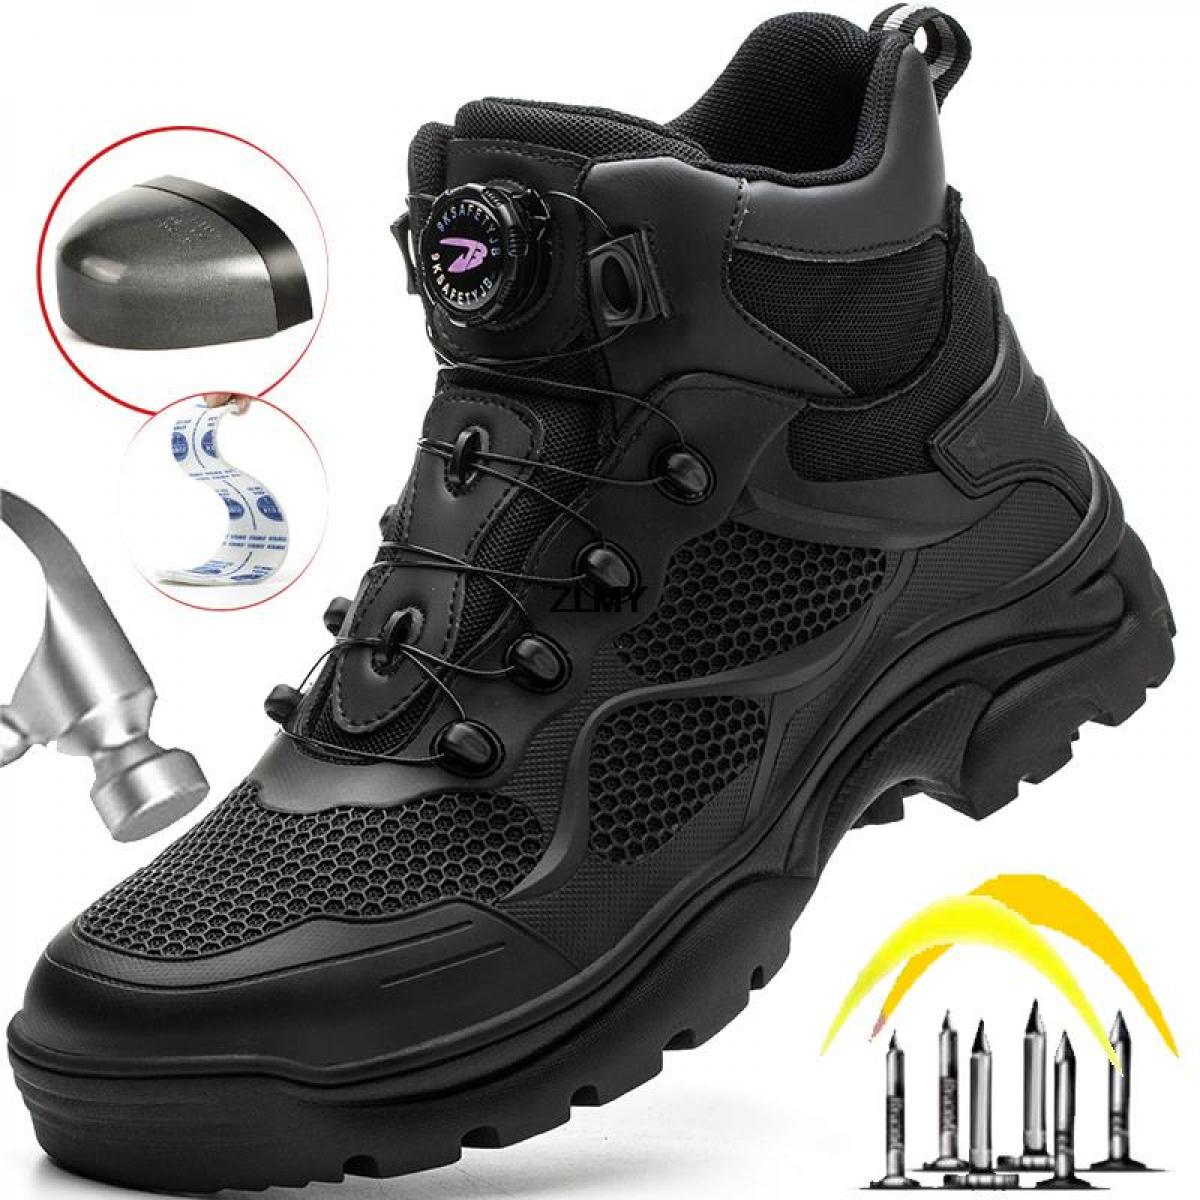 Indestructible Work Safety Boots Men Construction Safety Shoes Anti Smash Anti Stab Protect Footwear New Rotated Button 